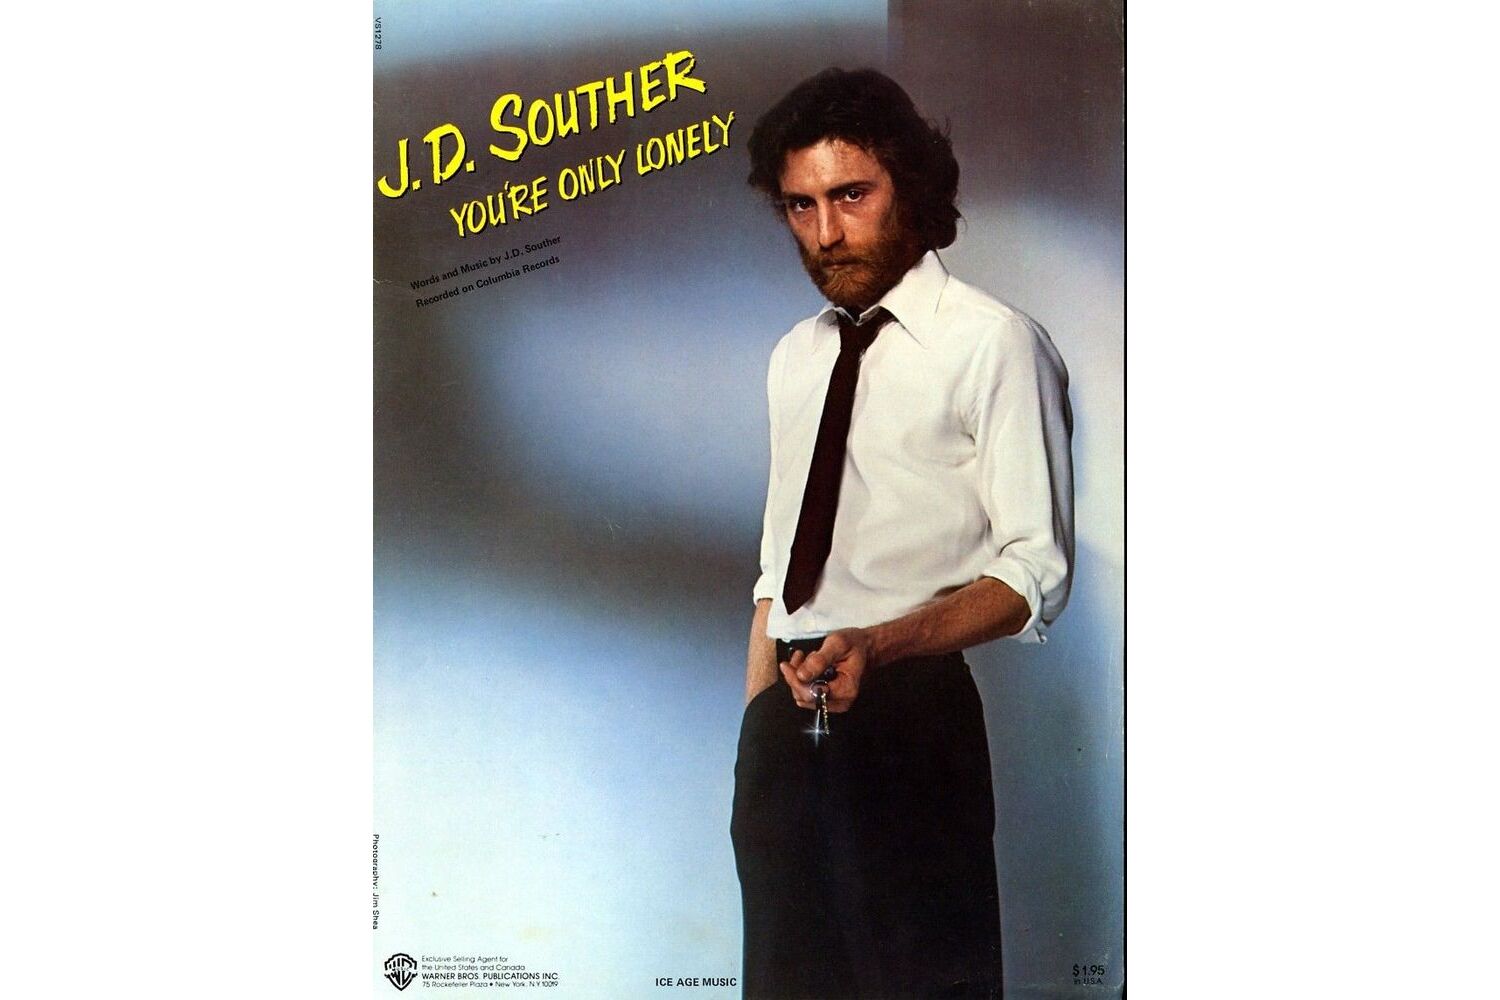 You're Only Lonely - Recorded by JD Souther on Columbia Records